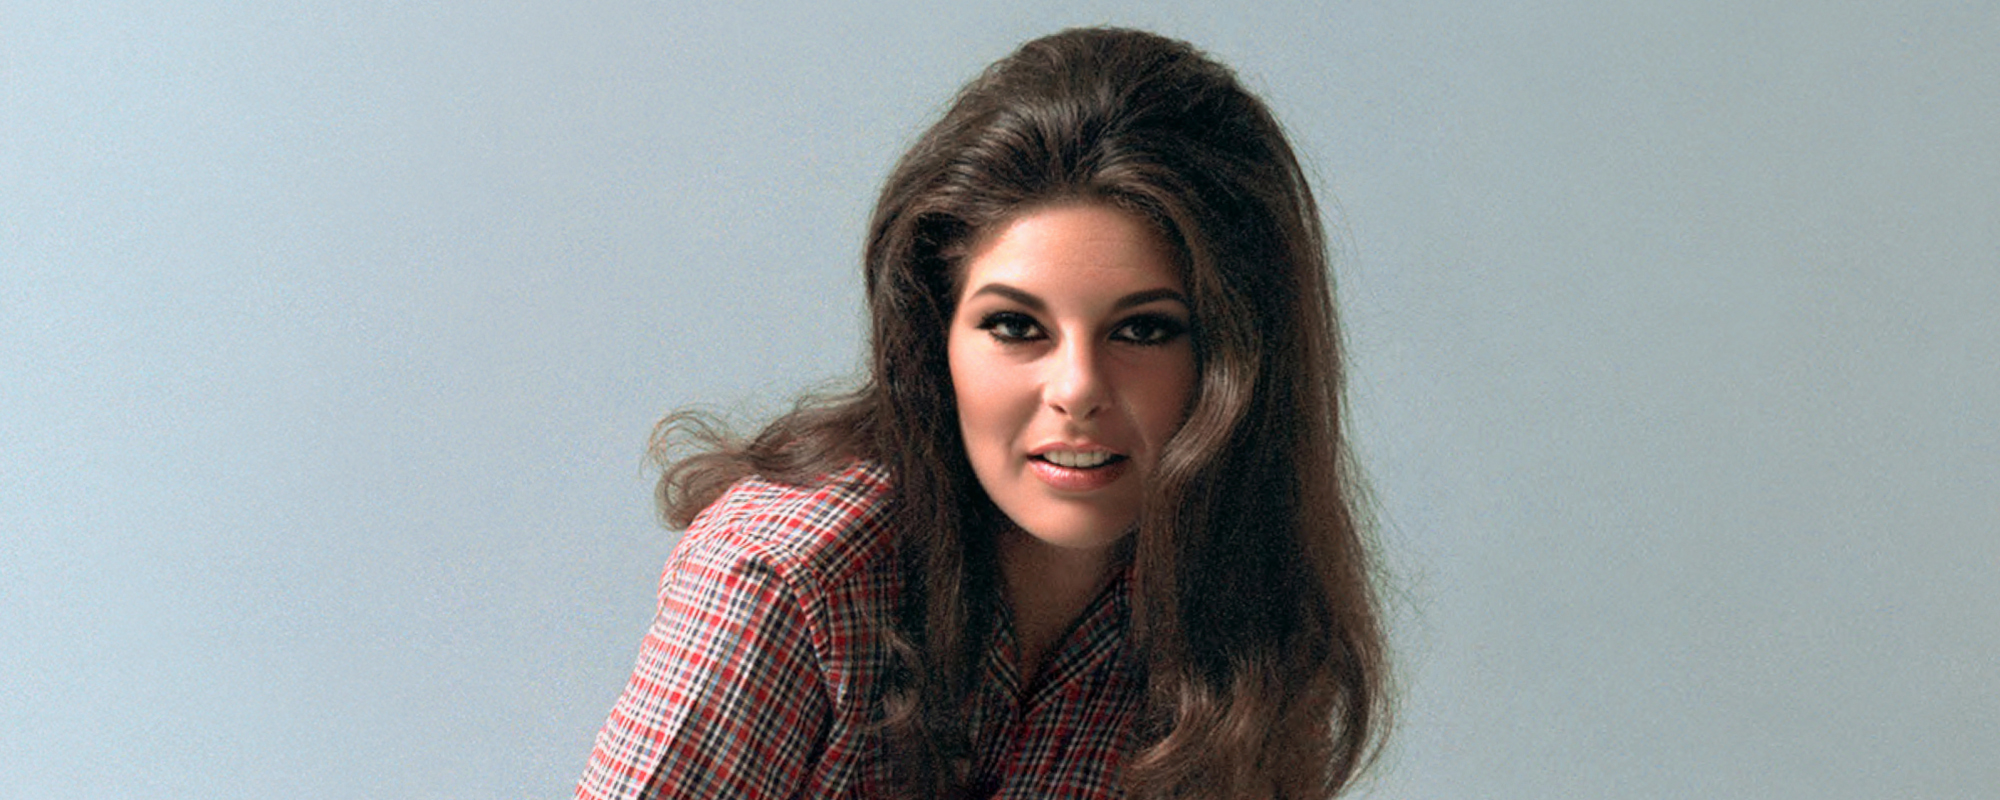 Review: Bobbie Gentry’s Double CD Distillation is the Perfect Introduction to Her Short but Influential Career